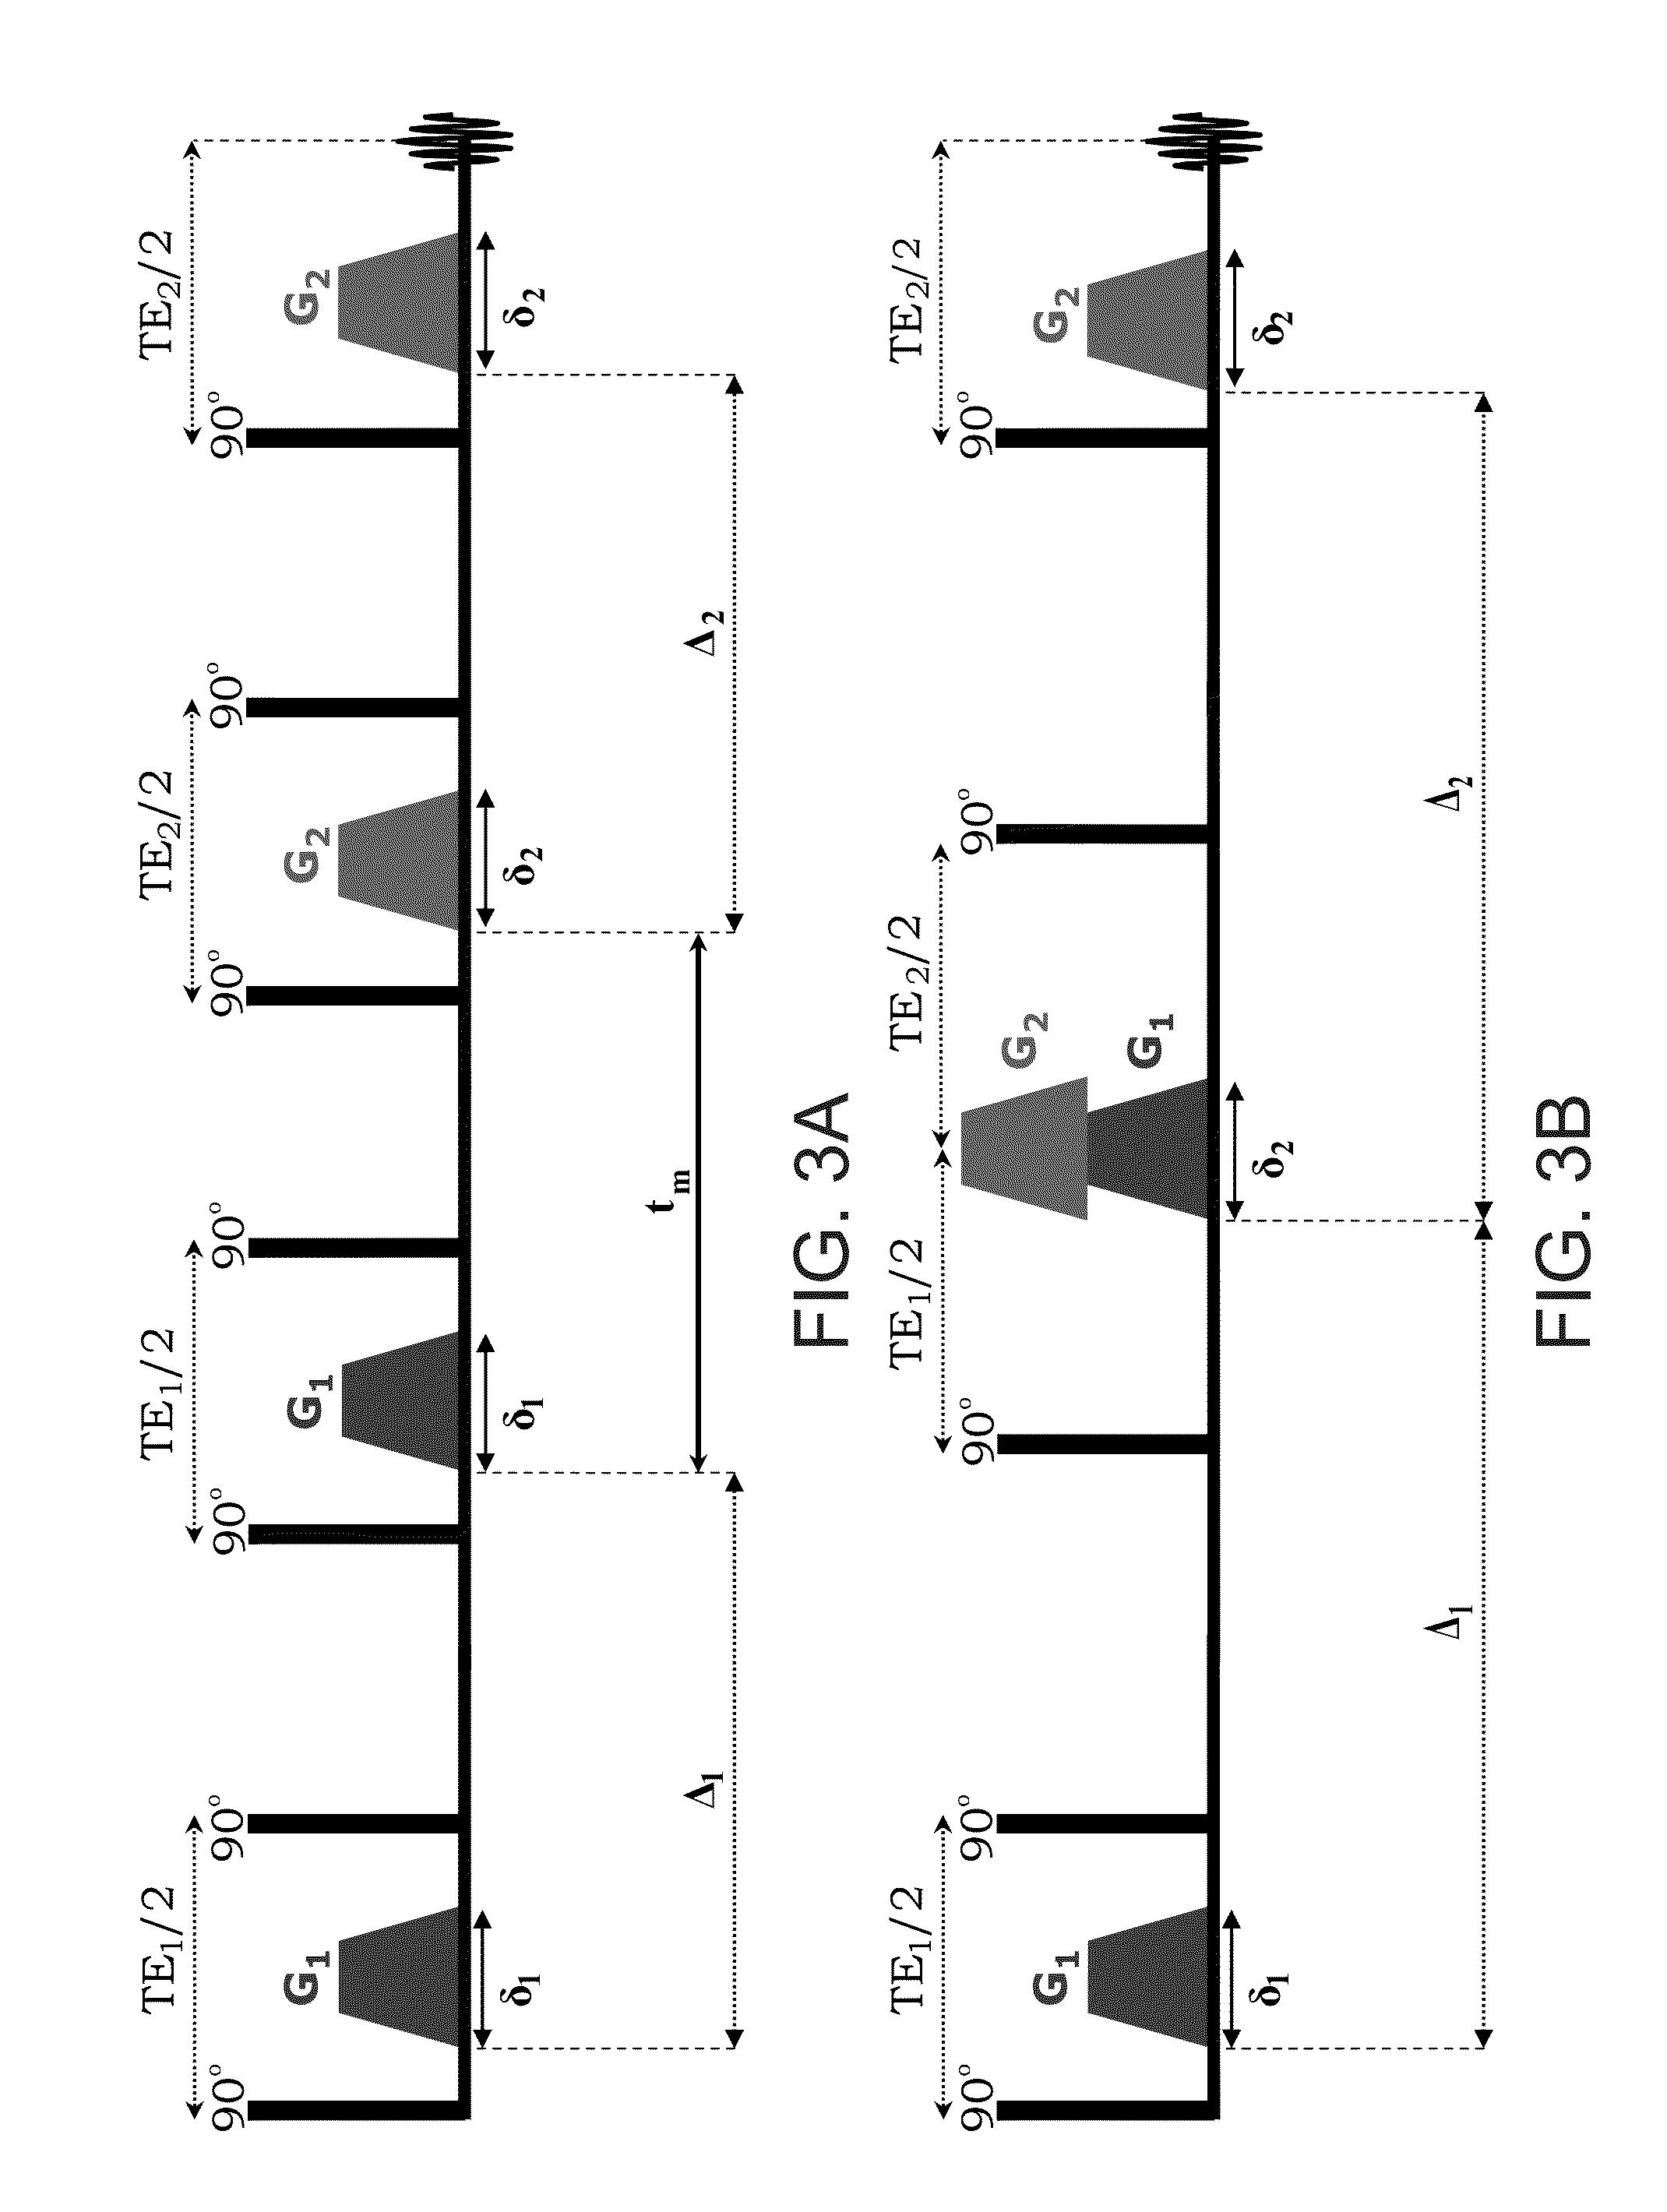 Magnetic resonance analysis using a plurality of pairs of bipolar gradient pulses